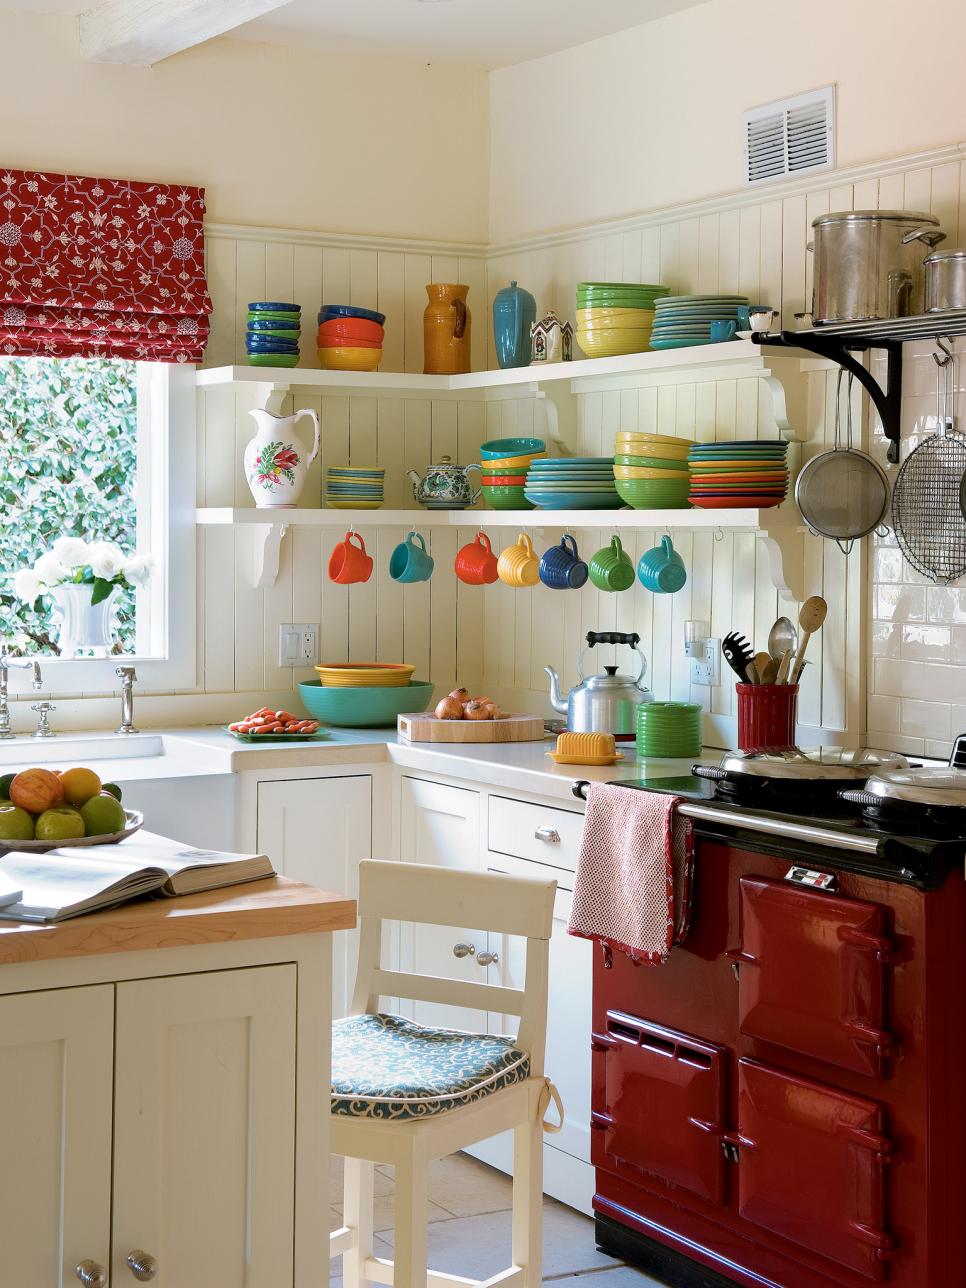 Beautiful Pictures of Small Kitchen Design Ideas From HGTV | HGTV kitchen ideas for small kitchens